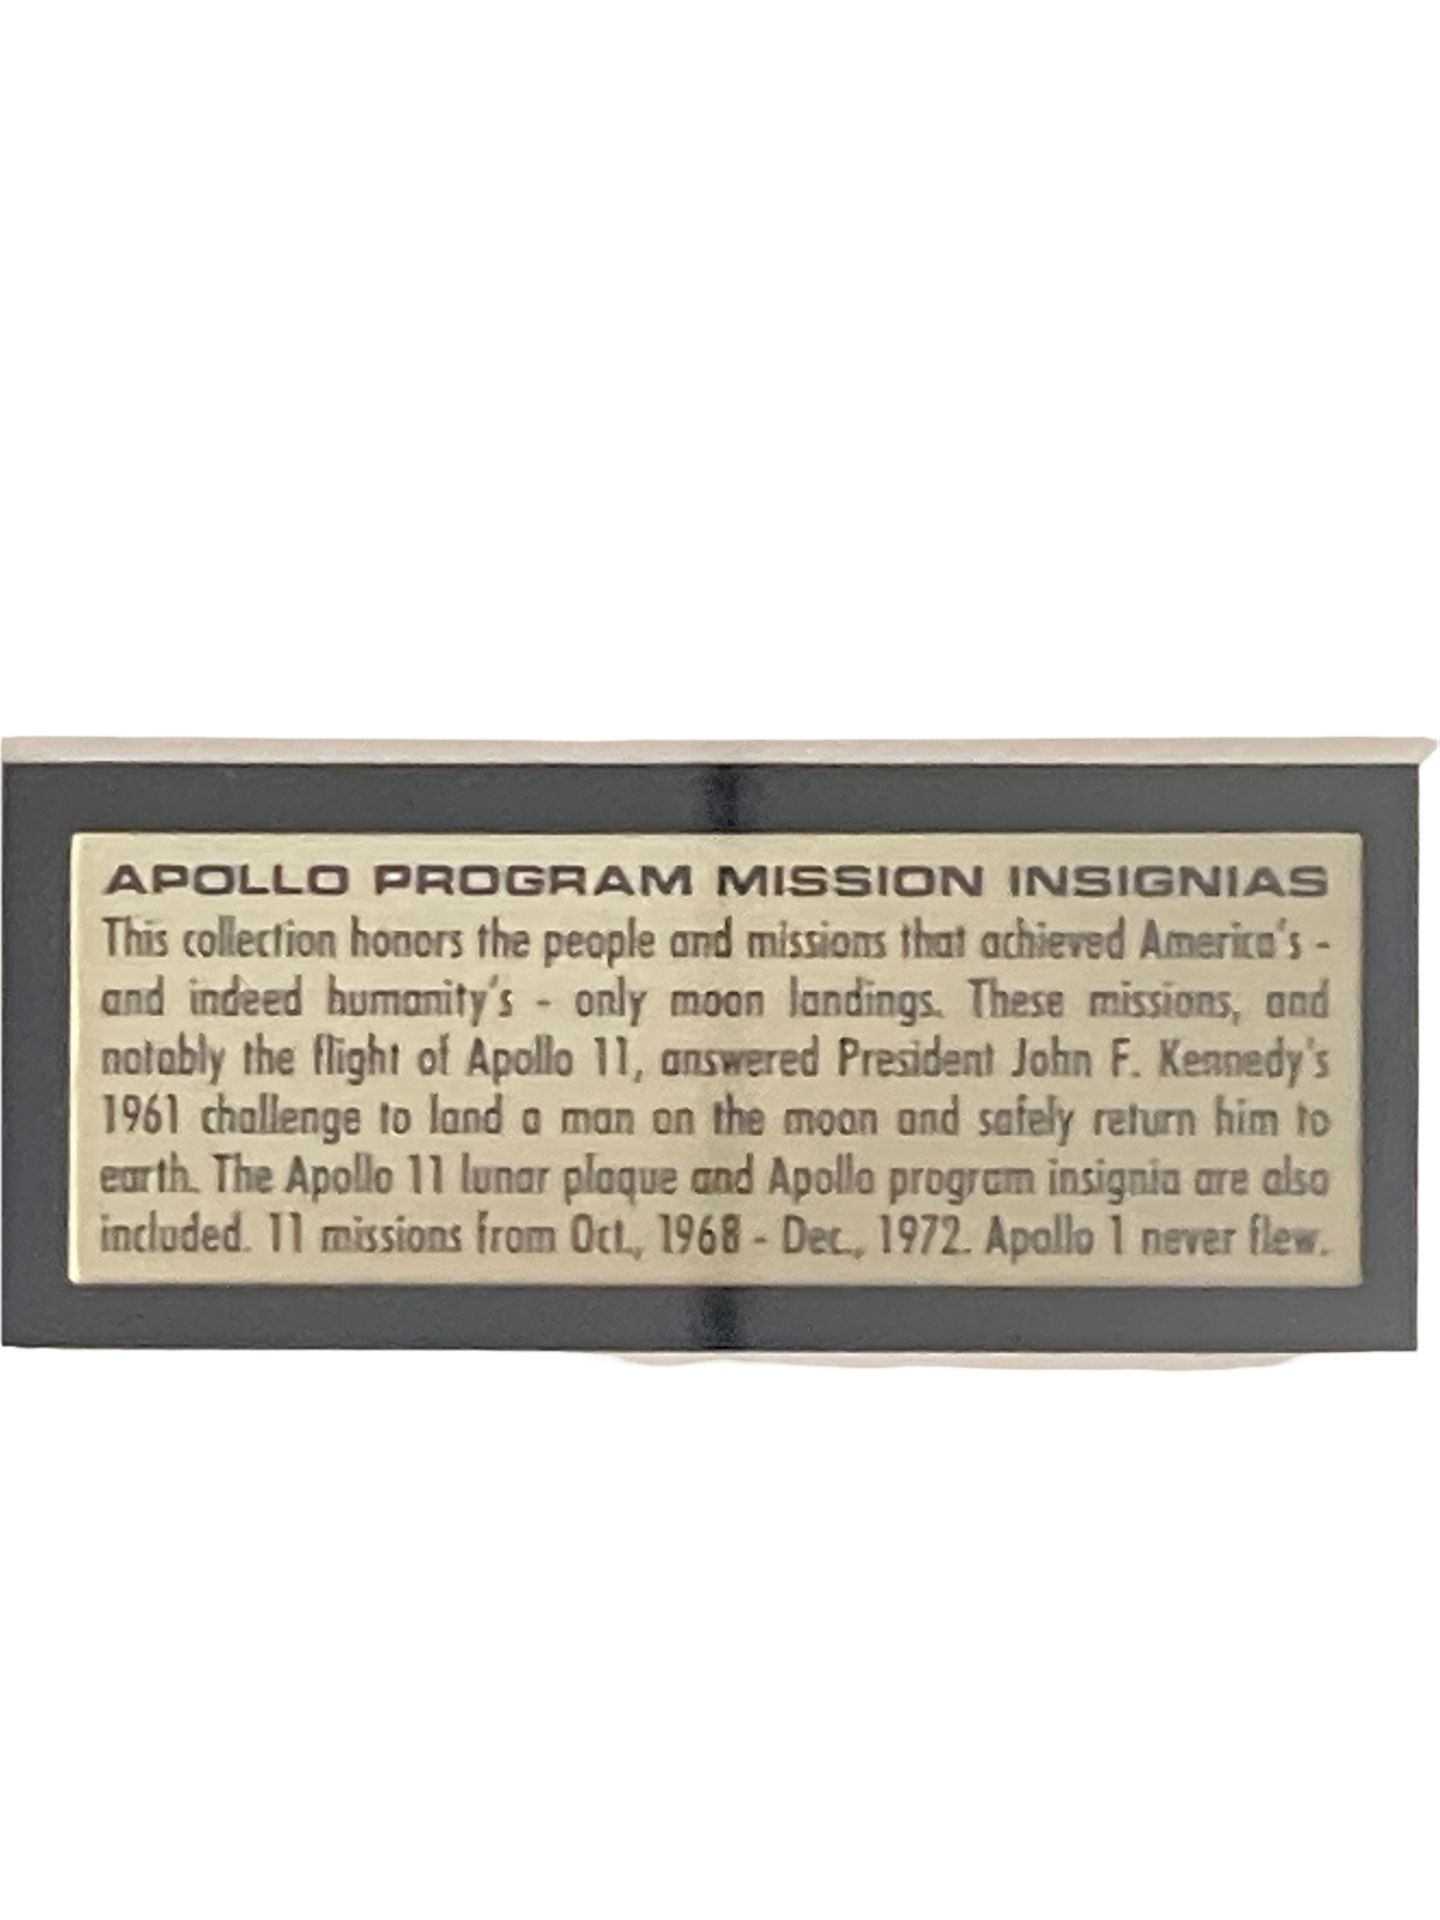 N2 NASA Staff Issue very Collectable APollo Program Mission Insignias - Image 5 of 5